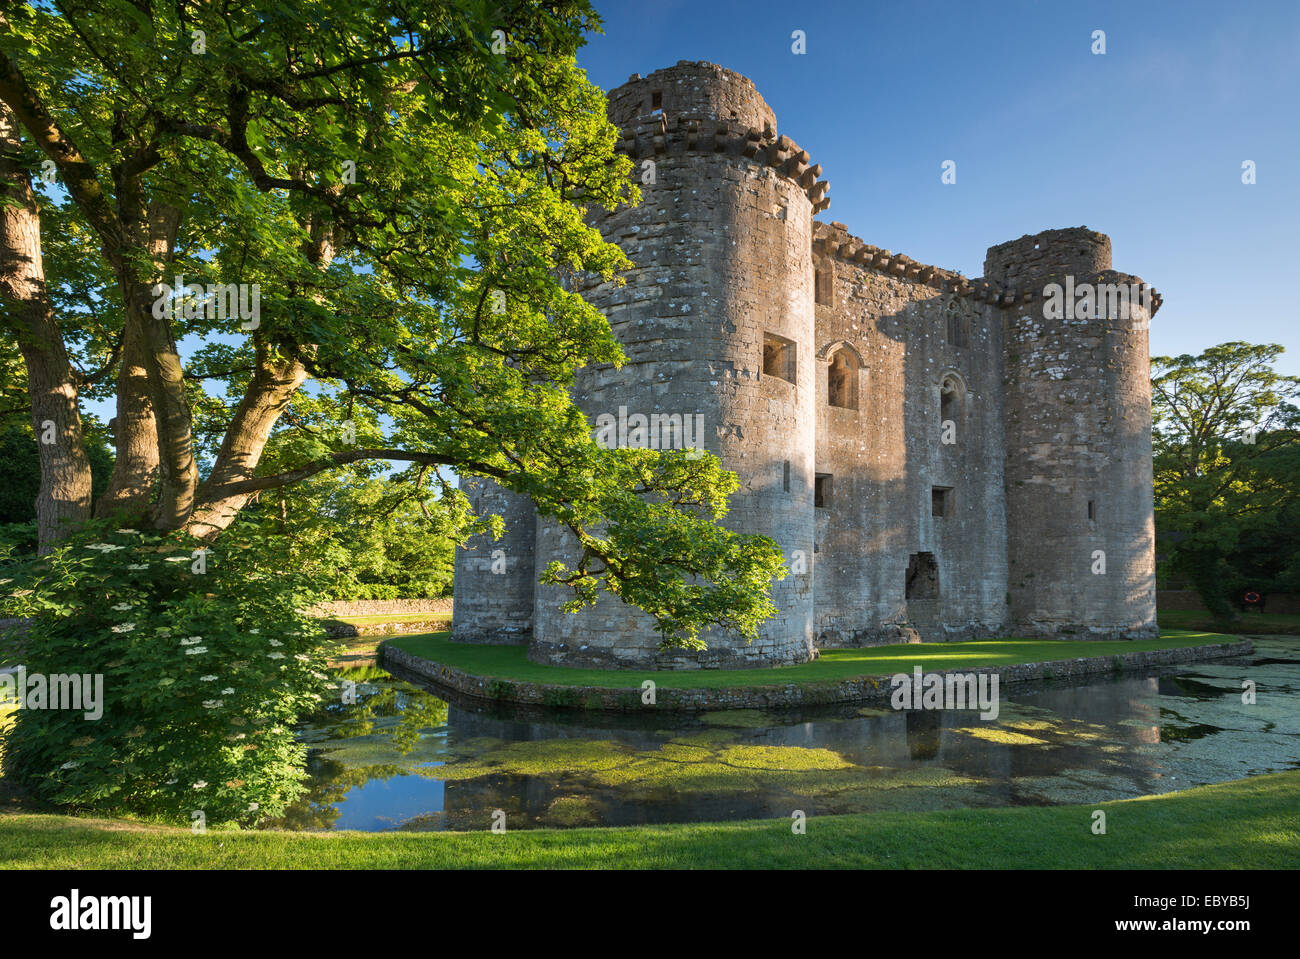 Nunney Castle and moat in the village of Nunney, Somerset, England. Summer (June) 2014. Stock Photo